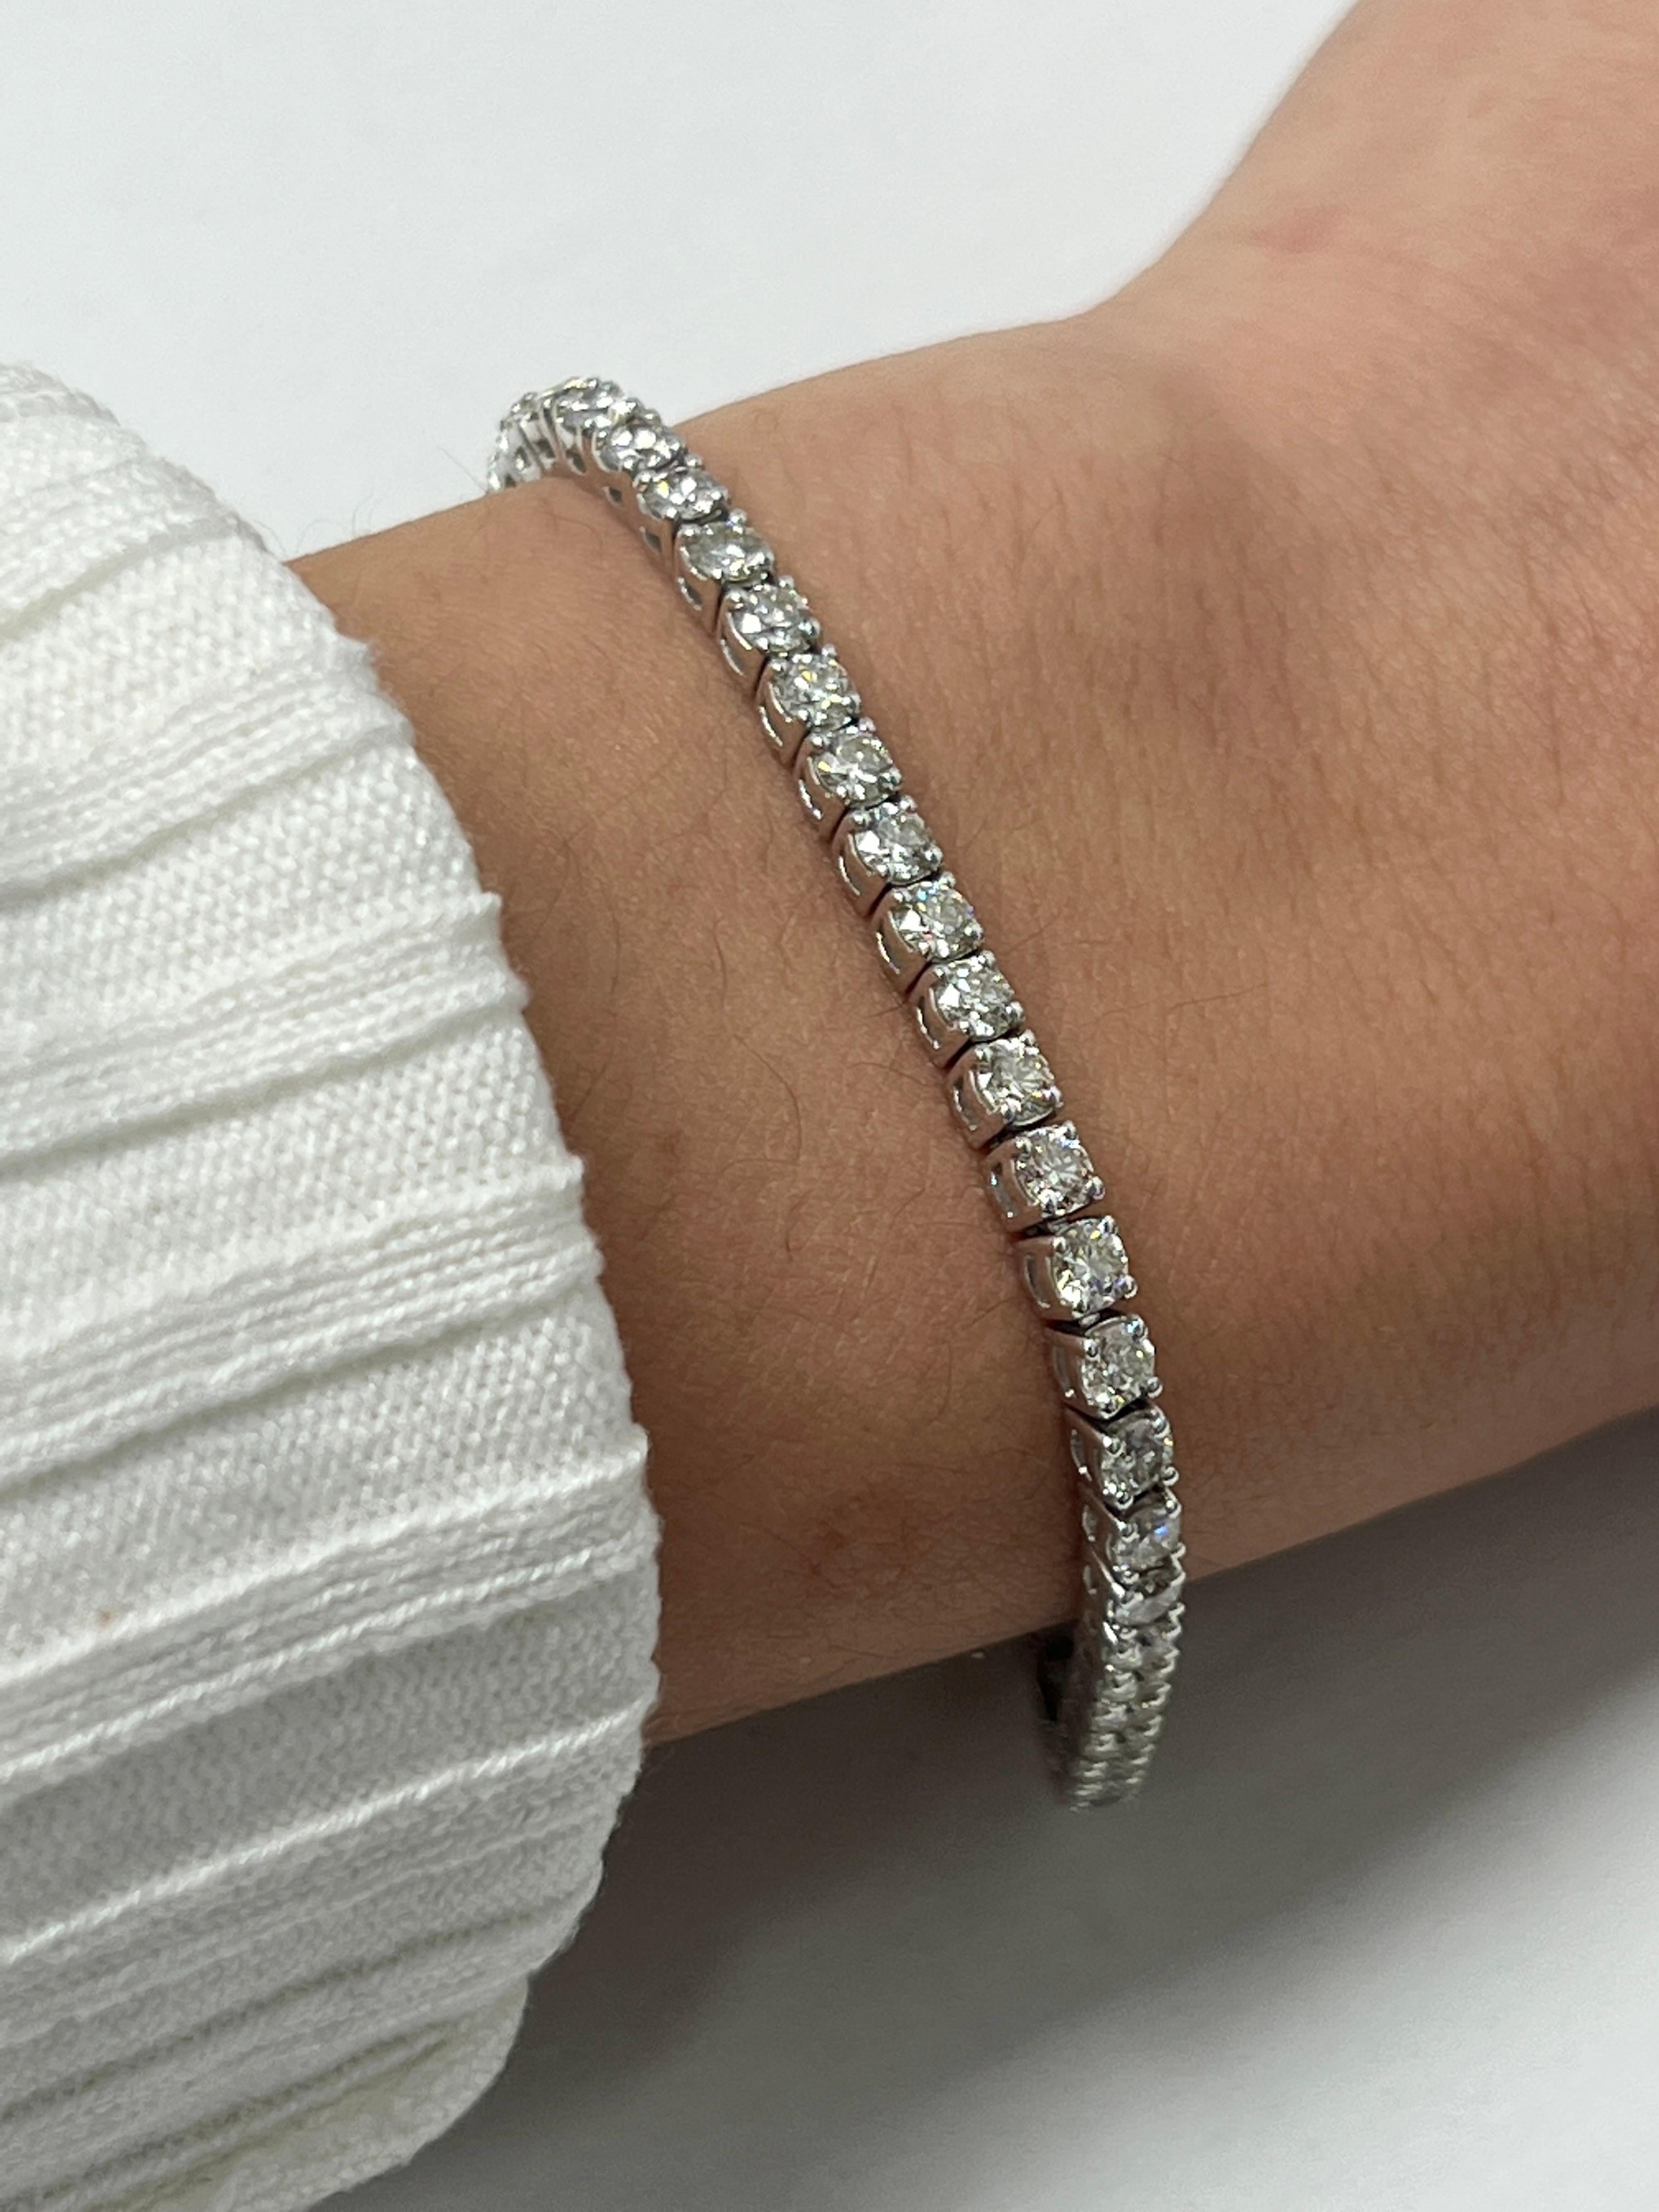 Fashion and glam are at the forefront with this exquisite diamond bracelet. This 18-karat white gold diamond bracelet is made from 13.3 grams of gold. The top is adorned with one row of I-J color, VS/SI clarity diamonds. This bracelet carries 48